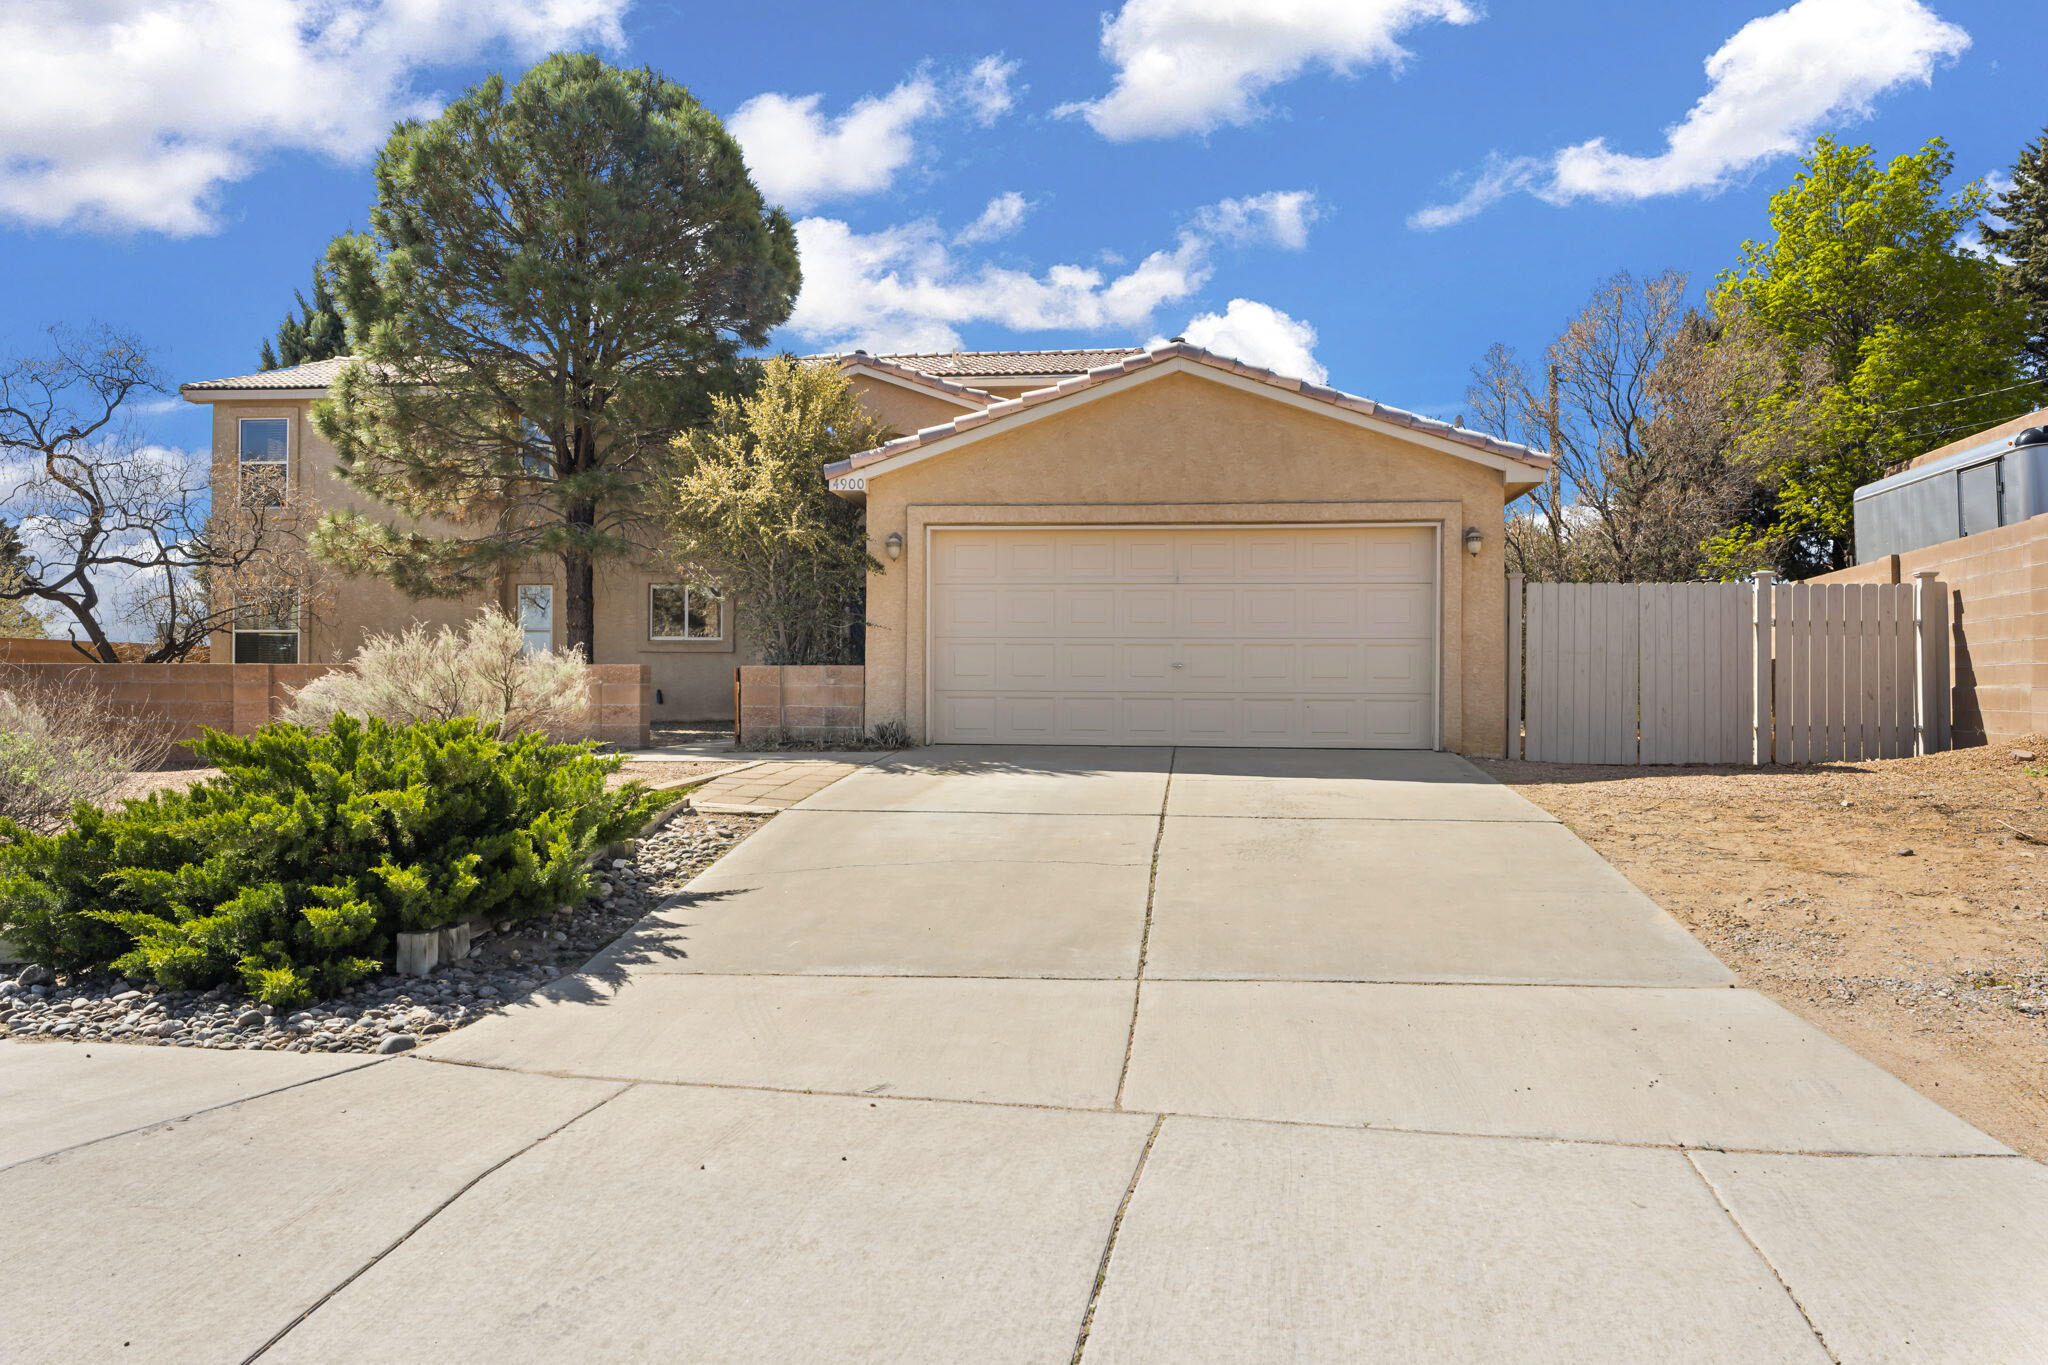 4900 Creek Place NW, Albuquerque, New Mexico 87114, 3 Bedrooms Bedrooms, ,2 BathroomsBathrooms,Residential,For Sale,4900 Creek Place NW,1060795